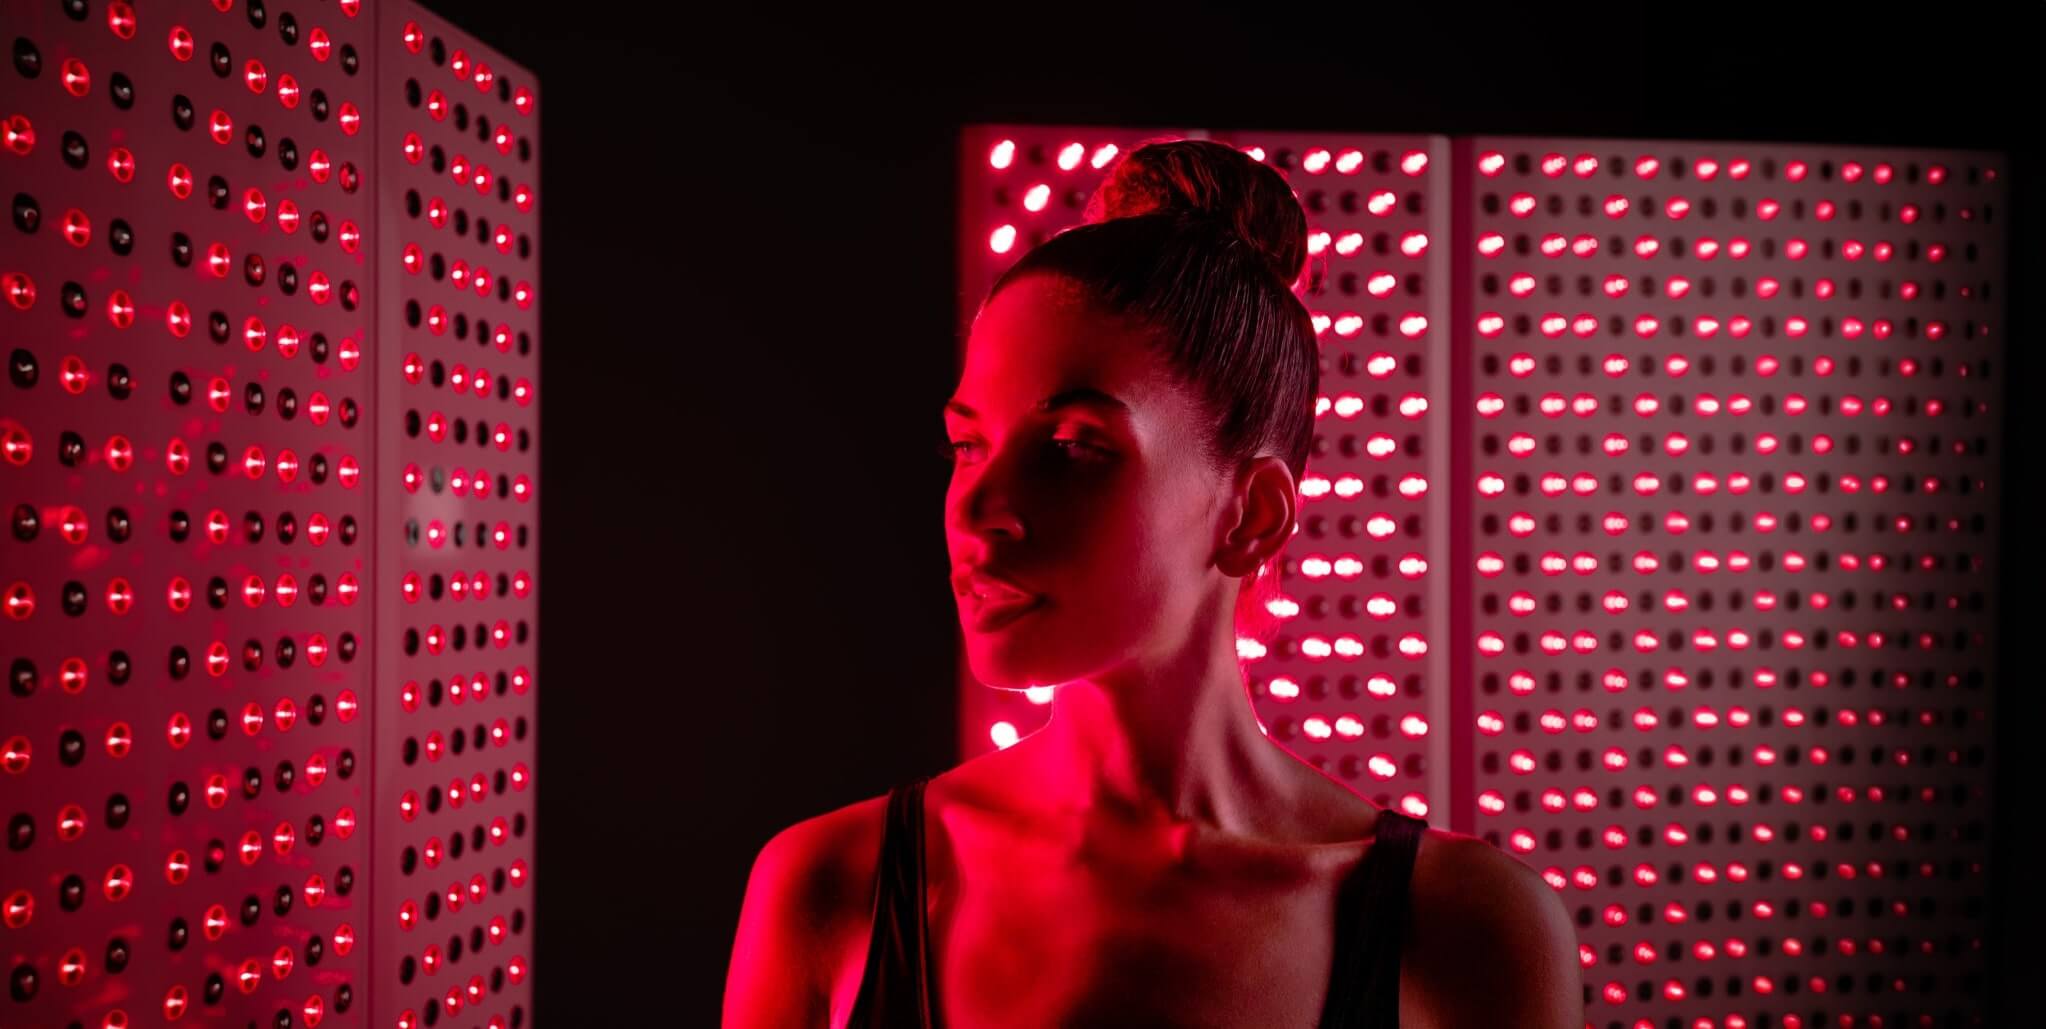 Lady standing infront of red light therapy panels